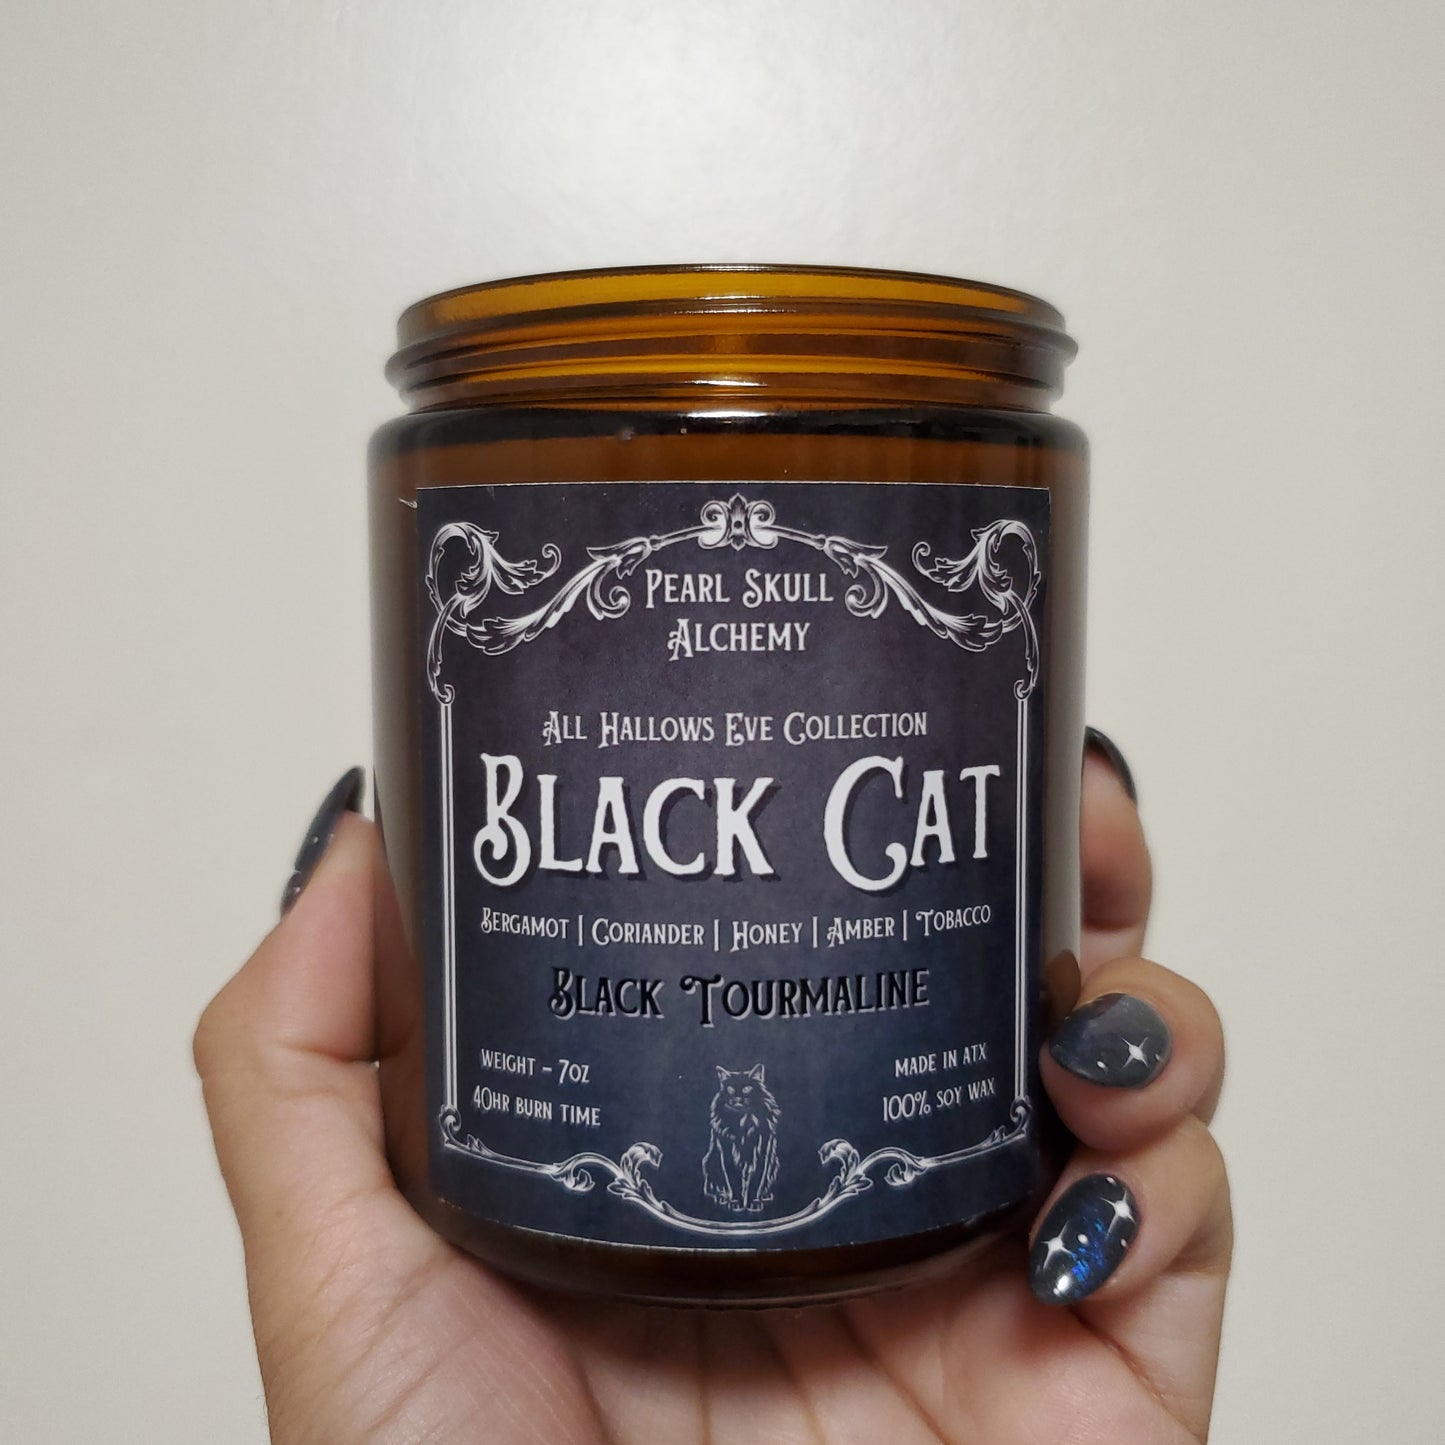 Black Cat - All Hallows Eve Collection